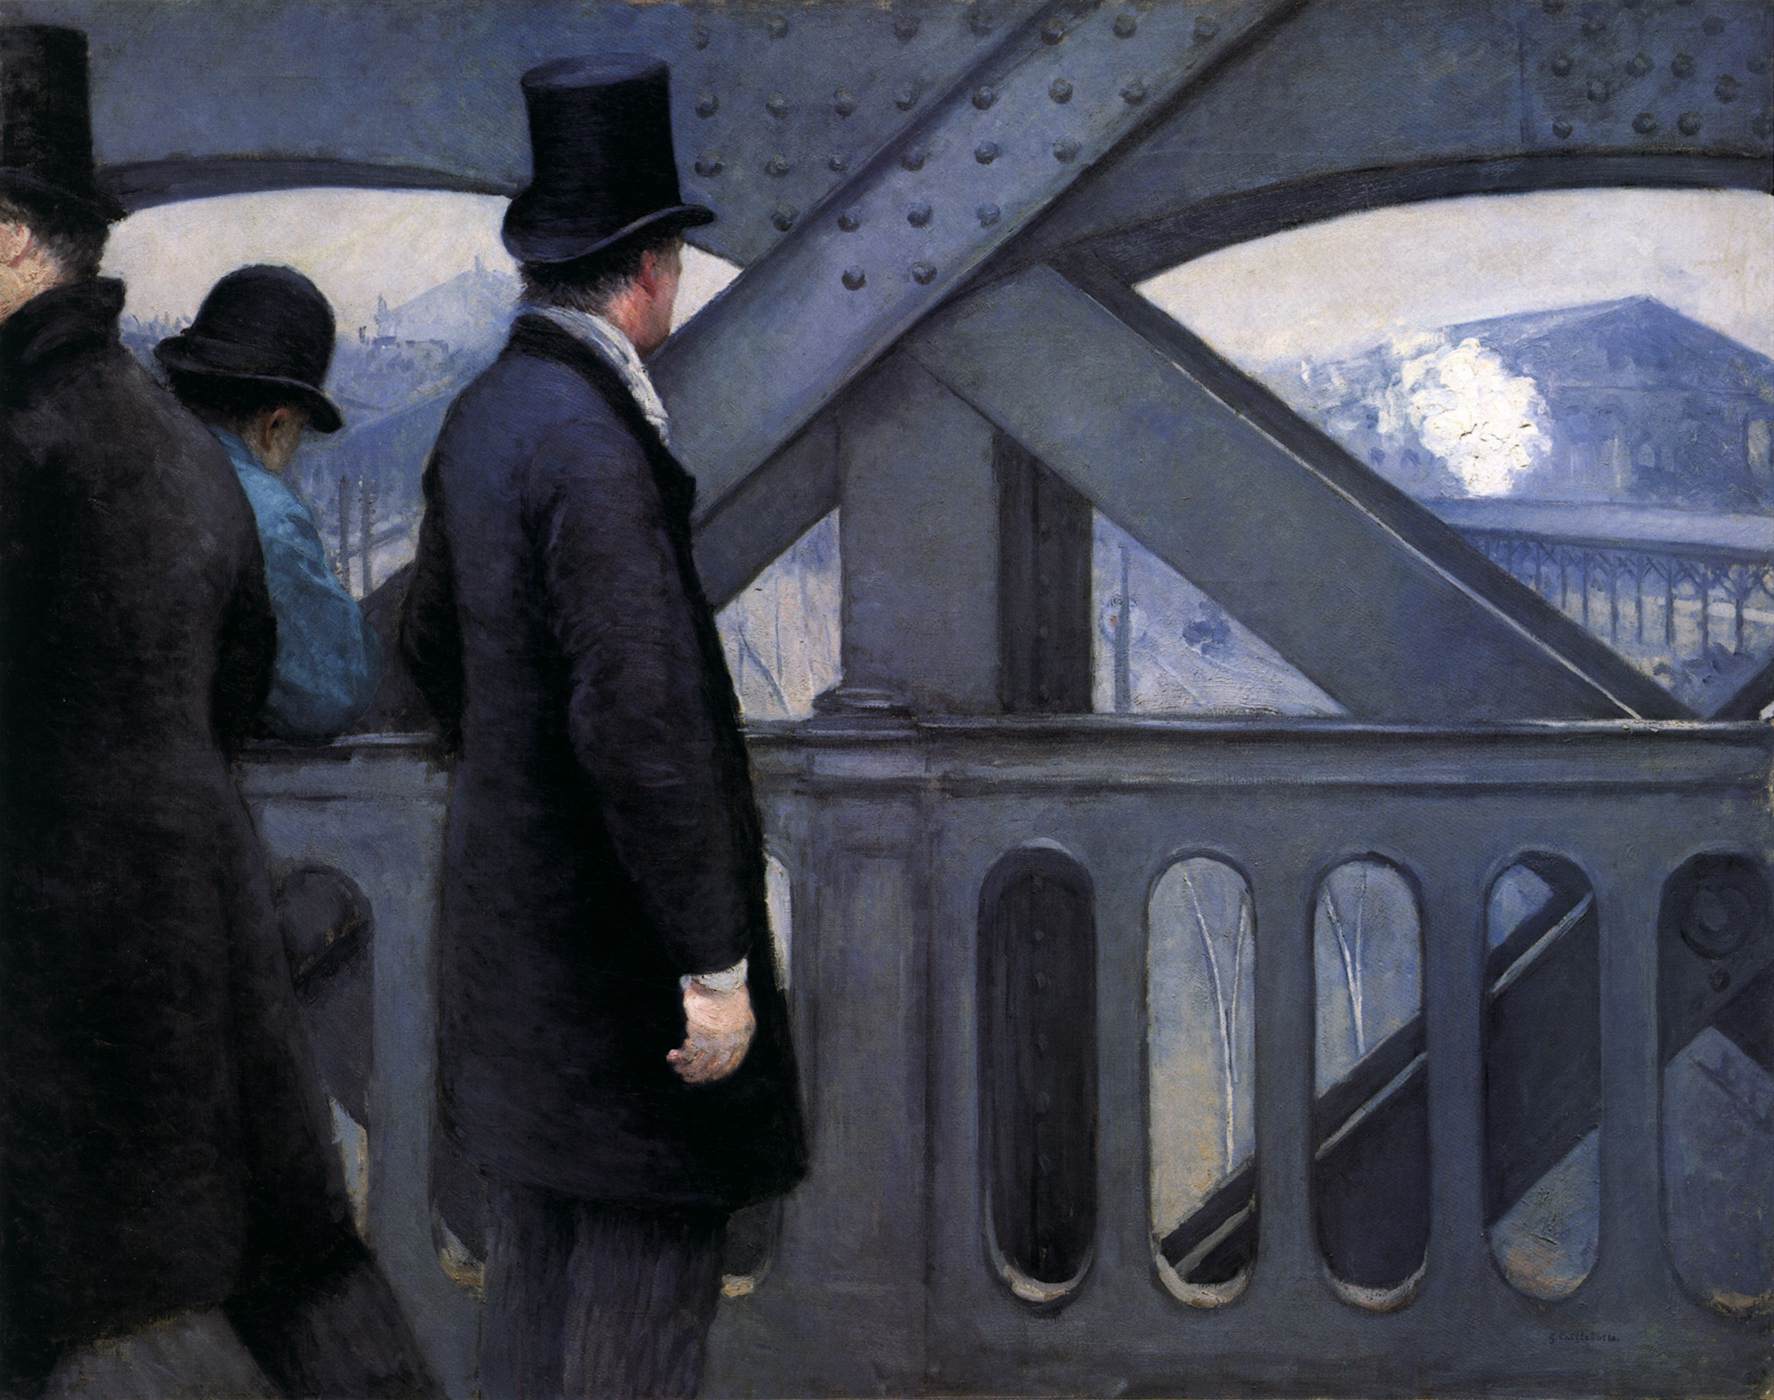 On the Pont de l'Europe by Gustave Caillebotte - 1876-77 - 105.7 x 130.8 cm Kimbell Art Museum